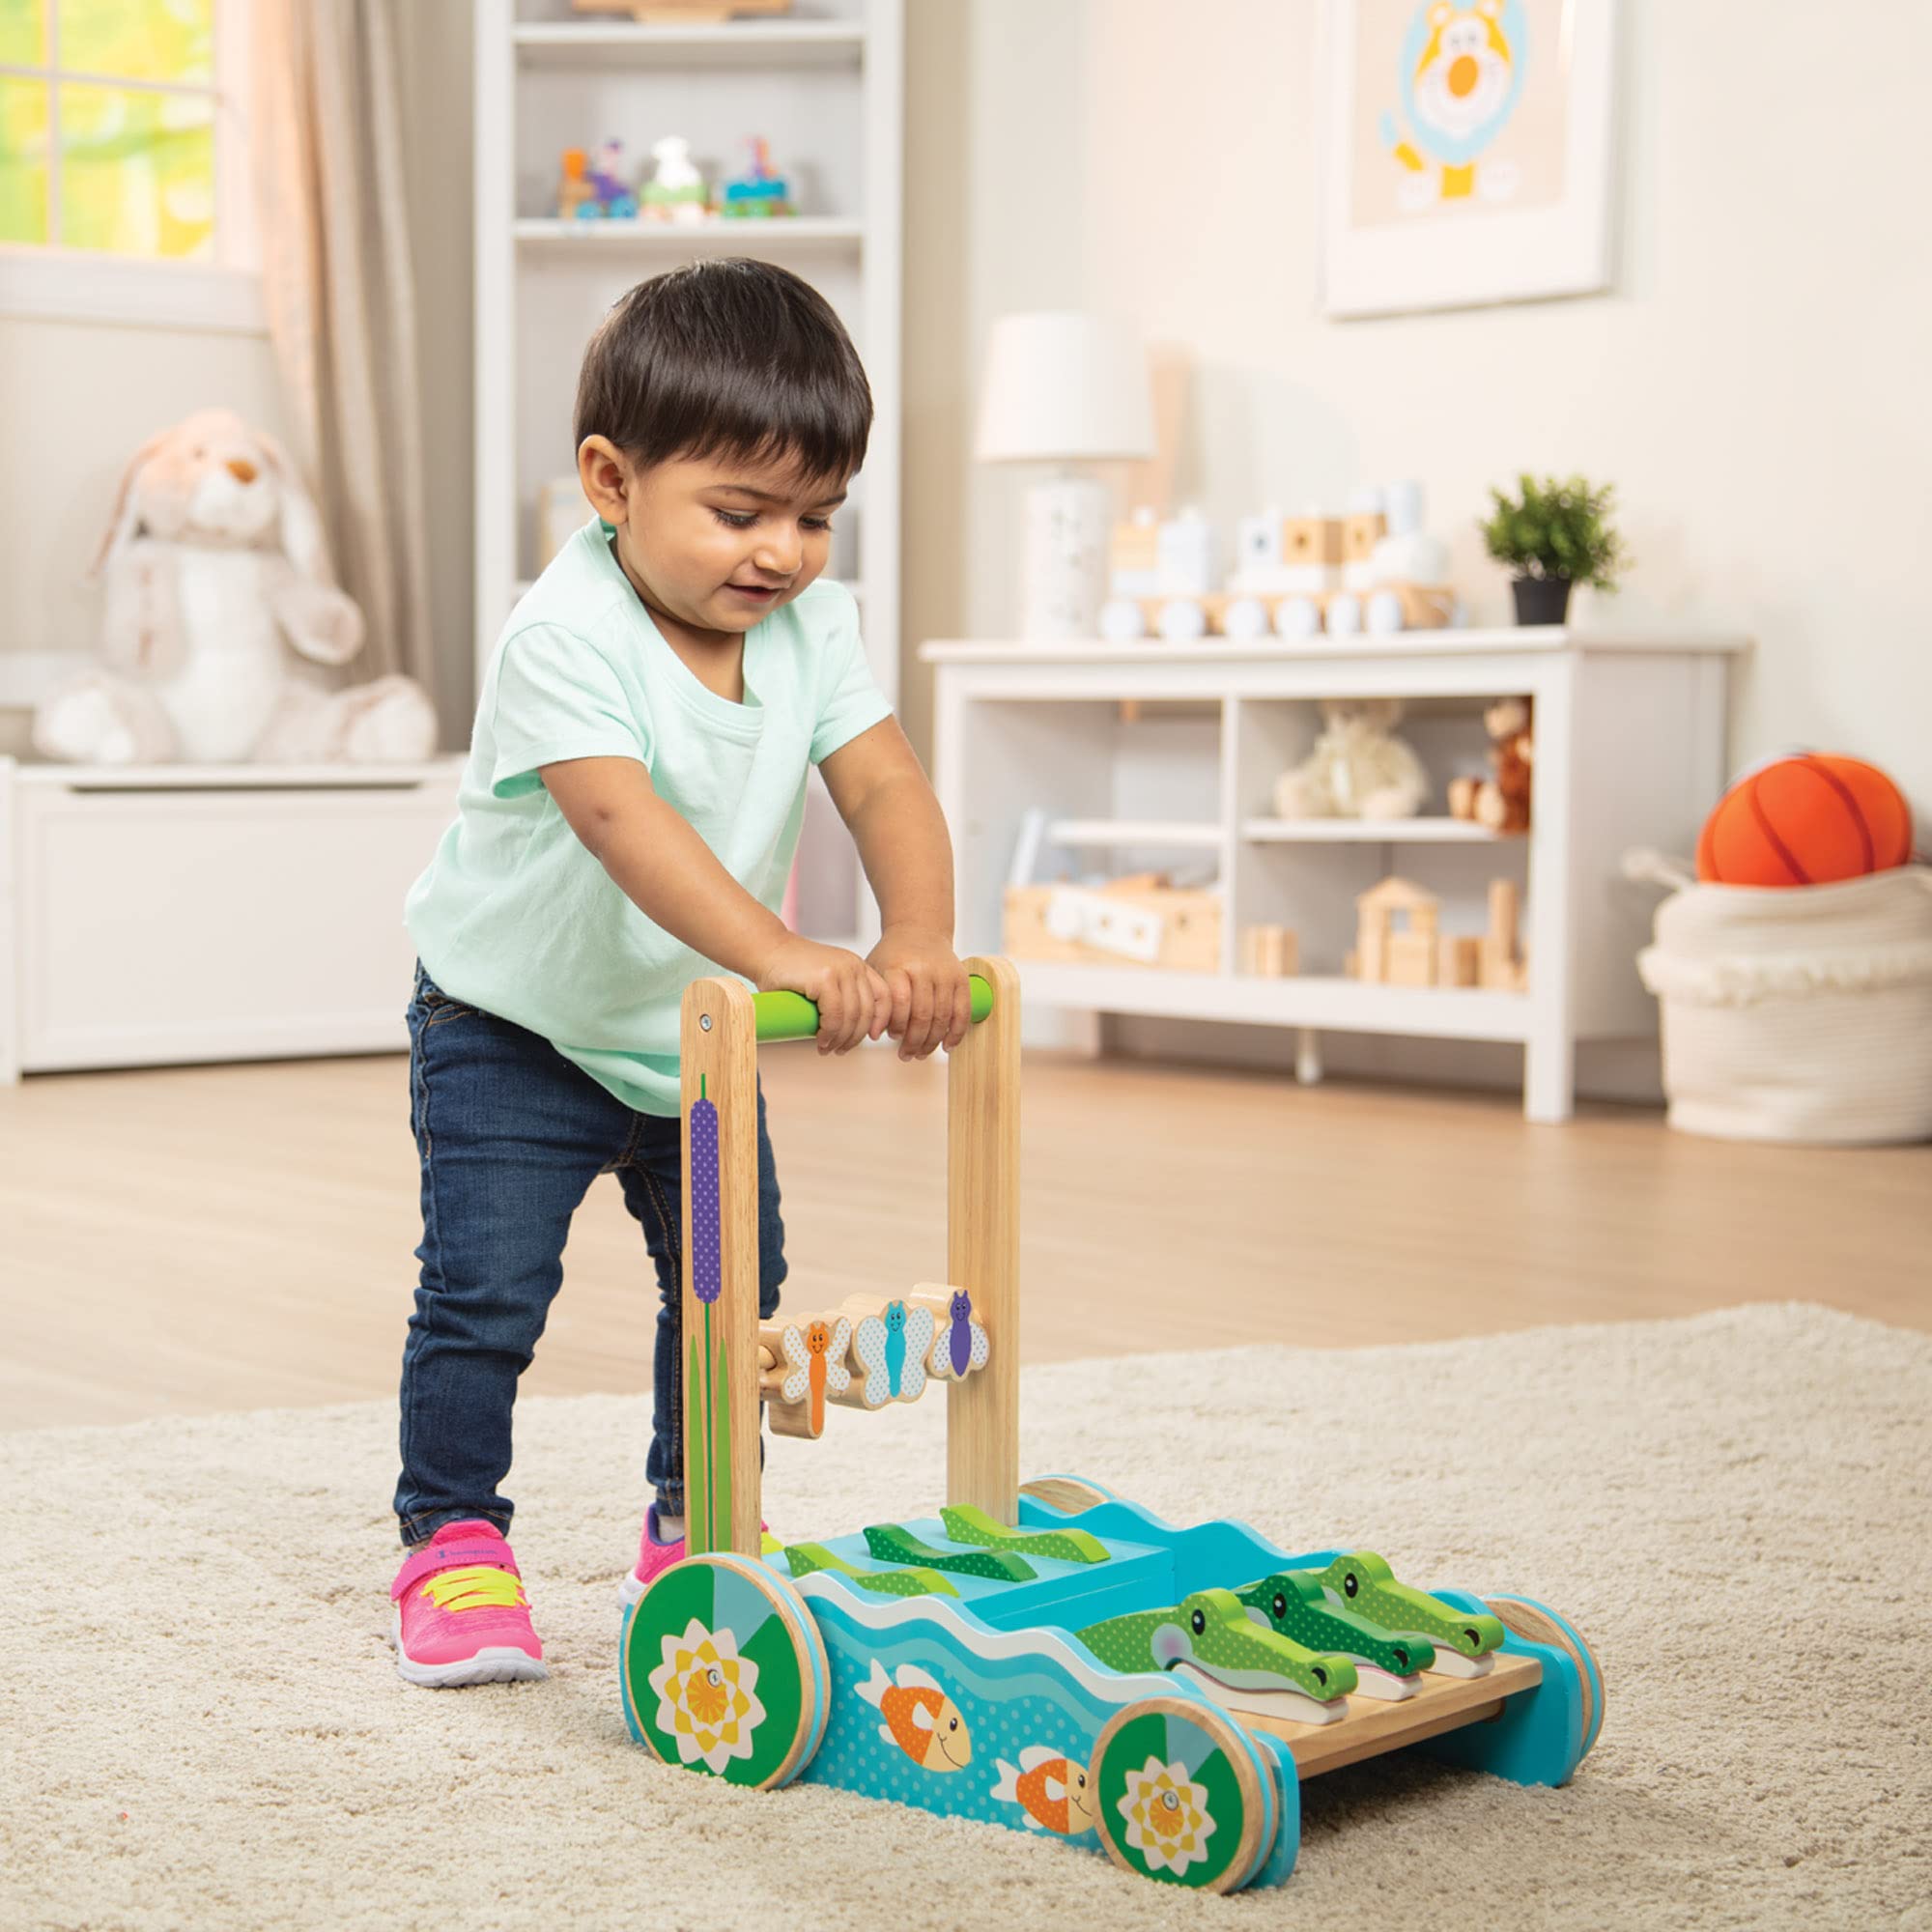 Melissa & Doug First Play Chomp and Clack Alligator Wooden Push Toy and Activity Walker - Pretend Play Developmental Baby Push Walker Toy For Toddlers Ages 1+, 1 EA